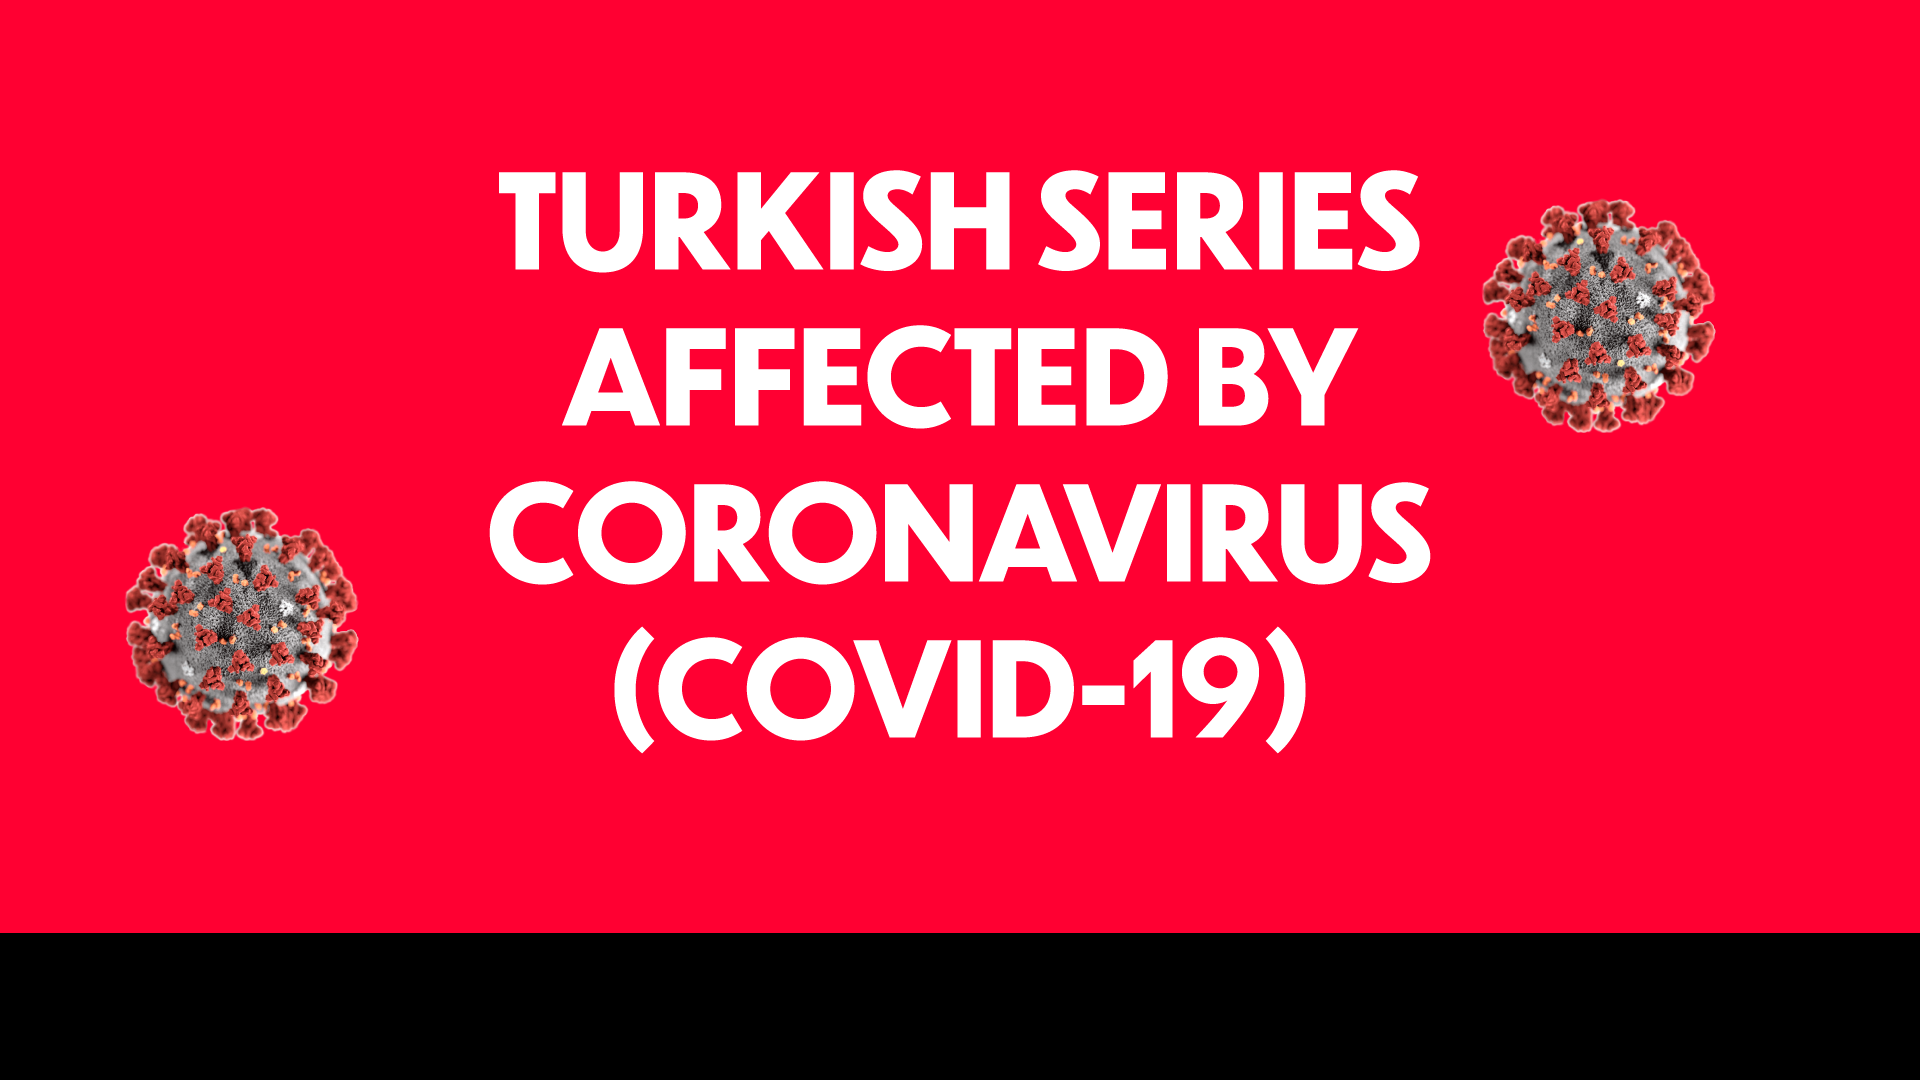 Production of Turkish Series Halted Due to COVID-19